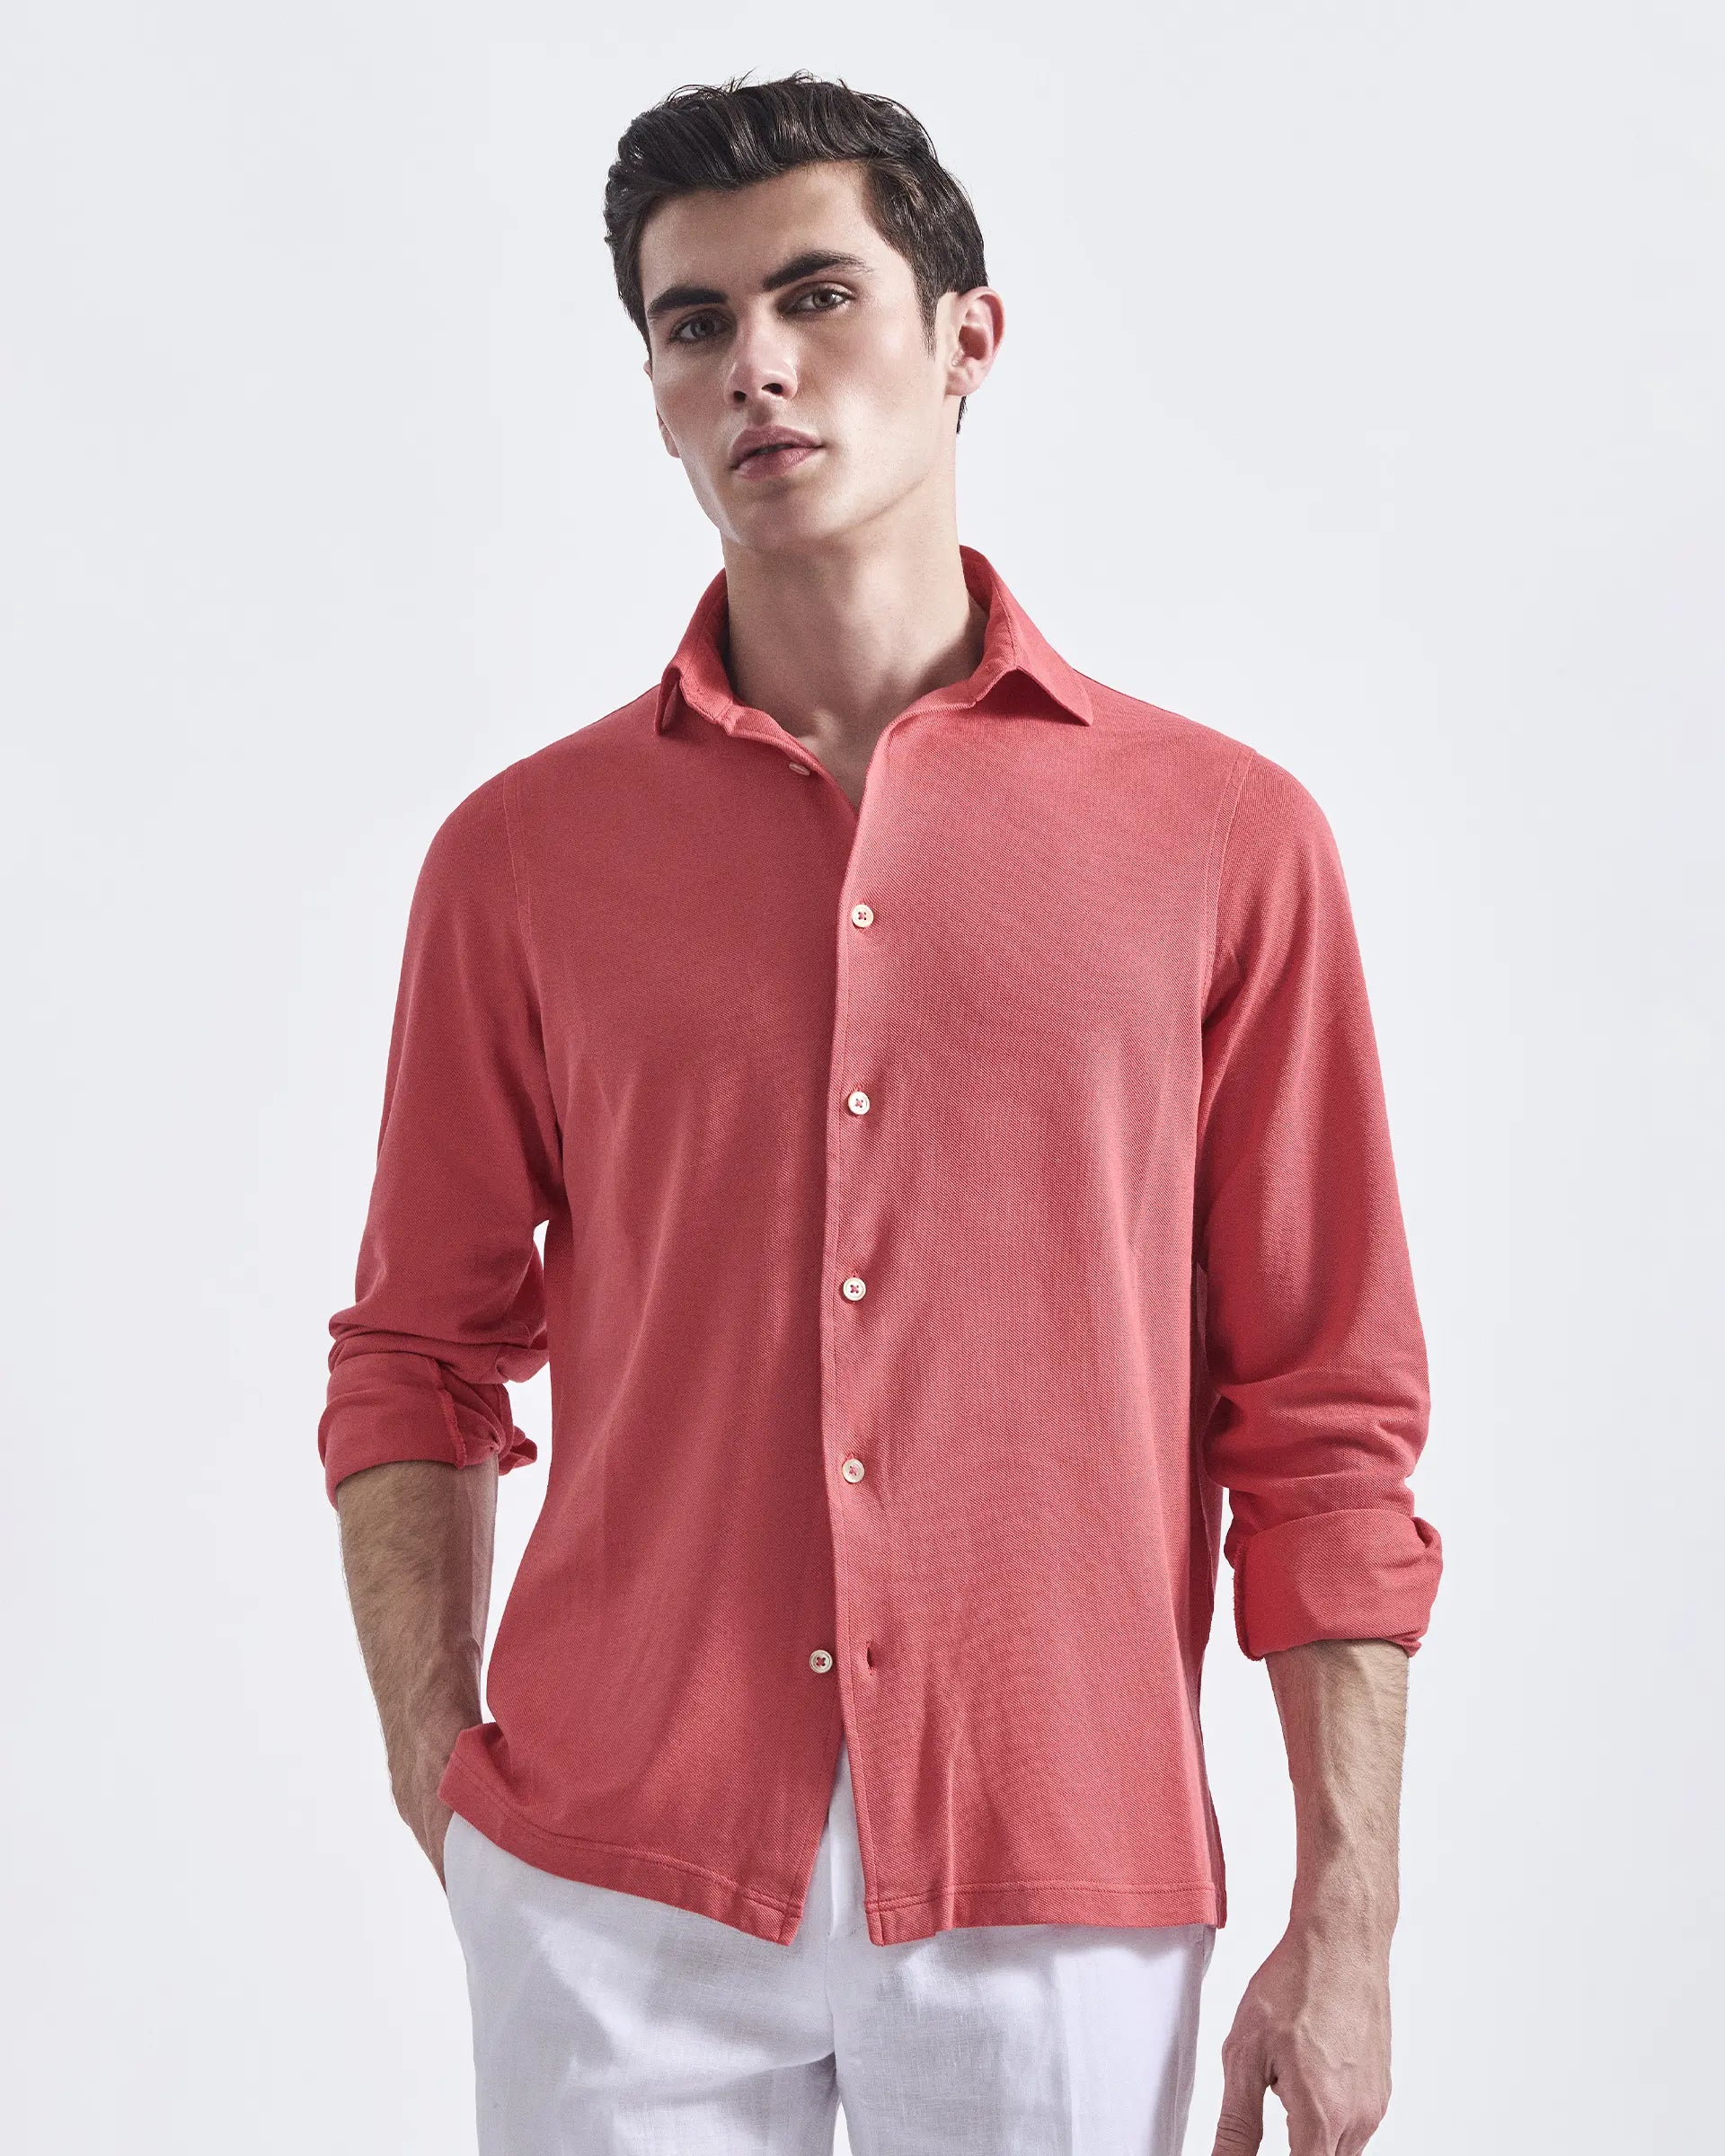 Coral shirt in garment-dyed piquet cotton